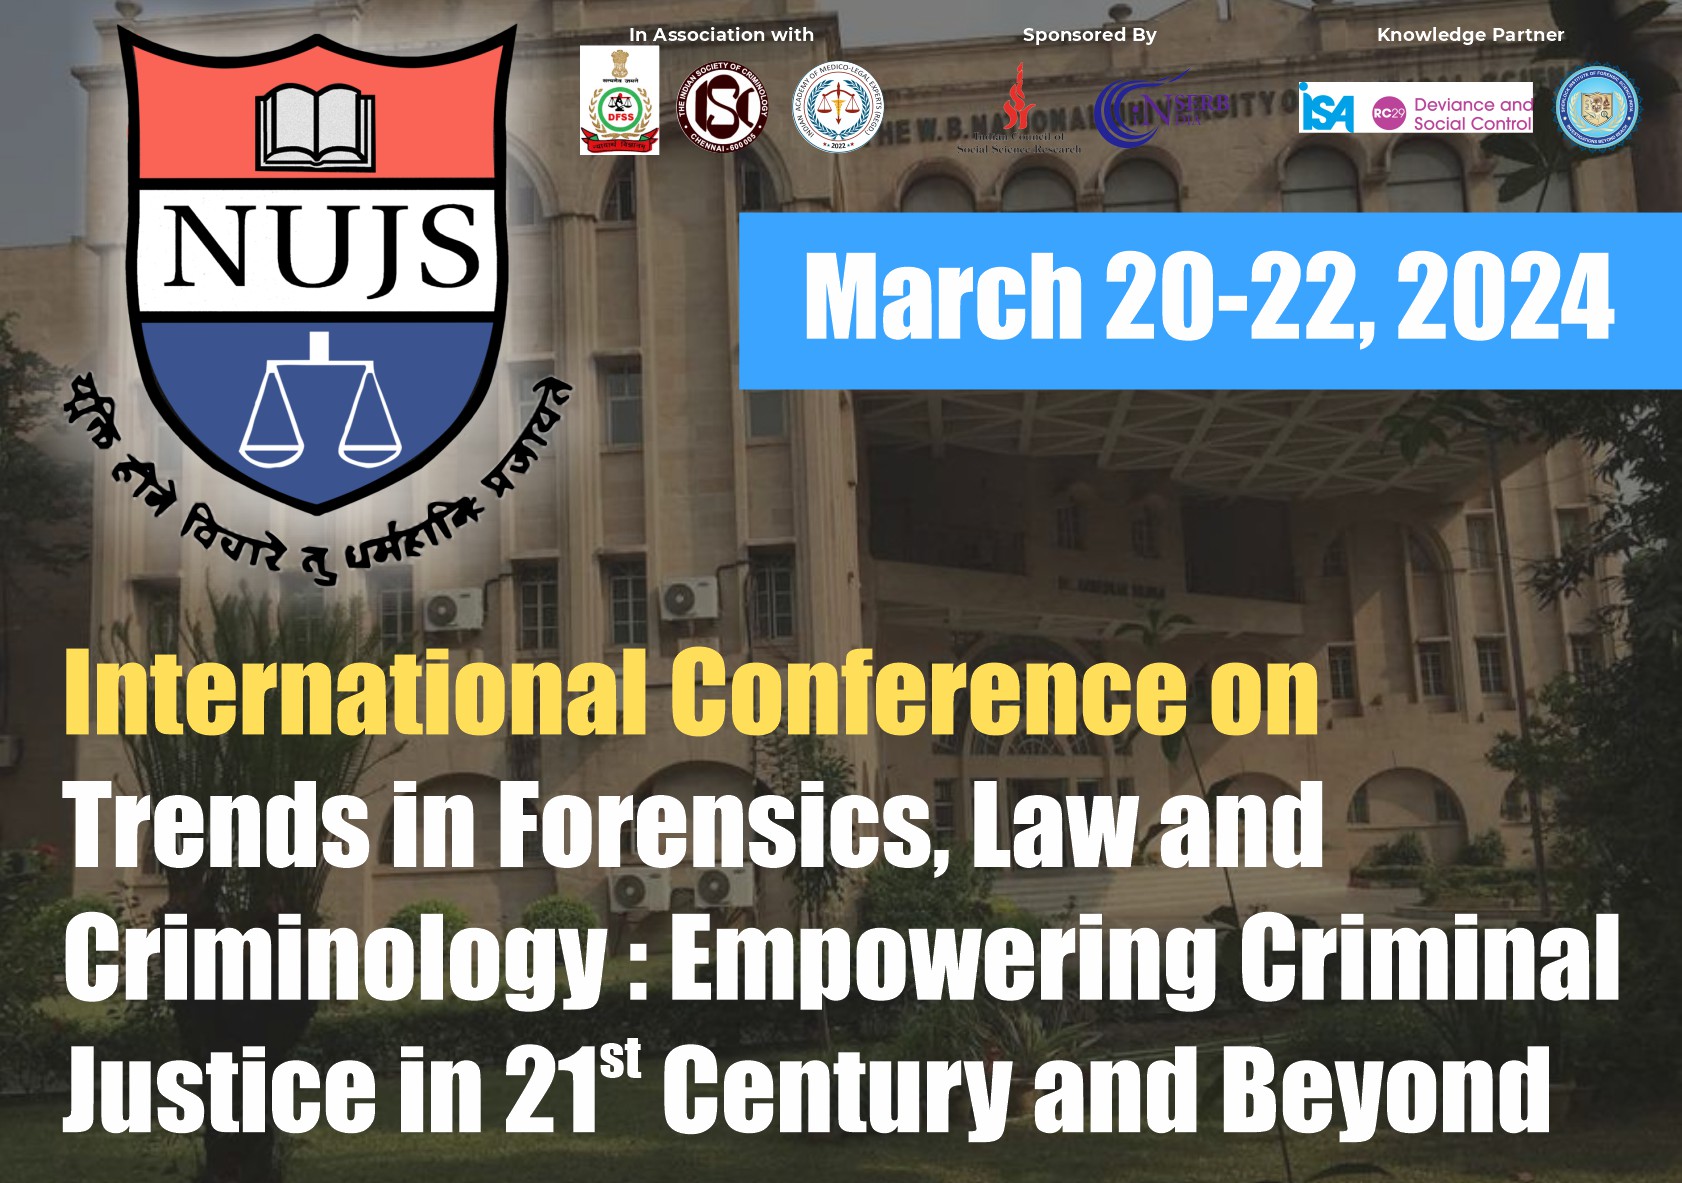 International Conference on Trends in Forensics, Law and Criminology